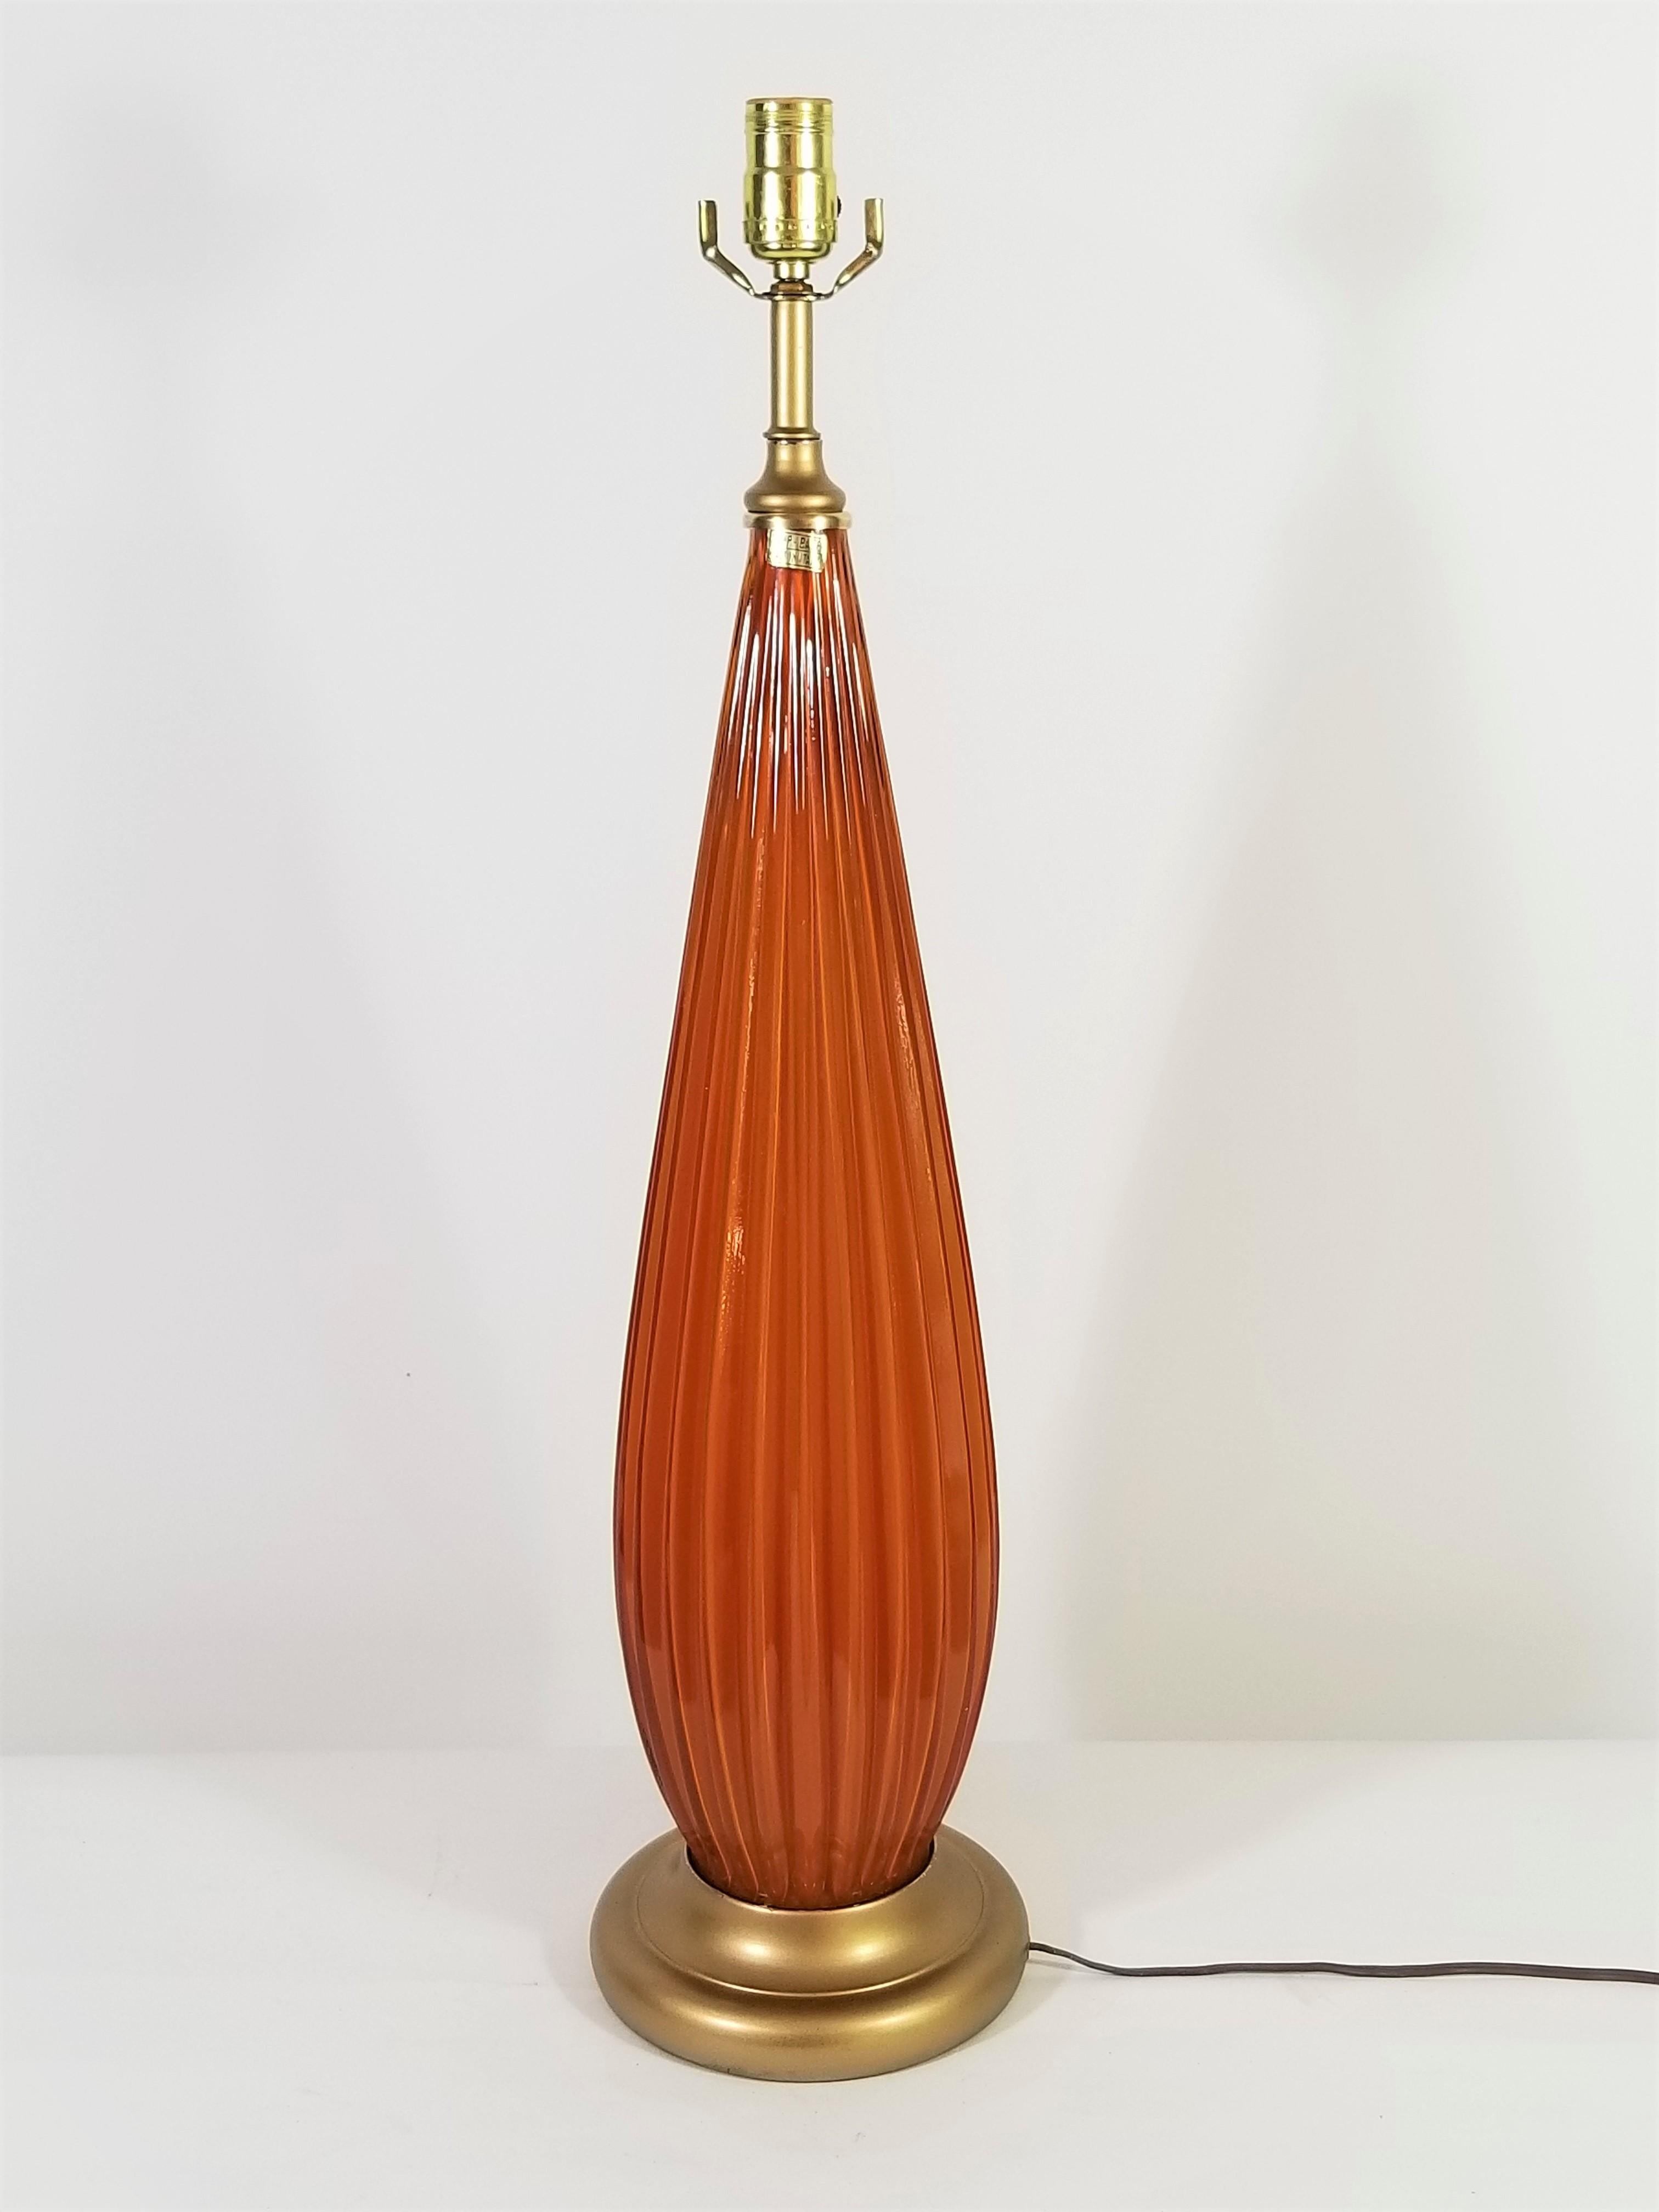 Stunning midcentury 1950s-1960s tall Italian Murano art glass table lamp. Made in Italy. Gorgeous color of burnt orange or pumpkin art glass. Still retains original 